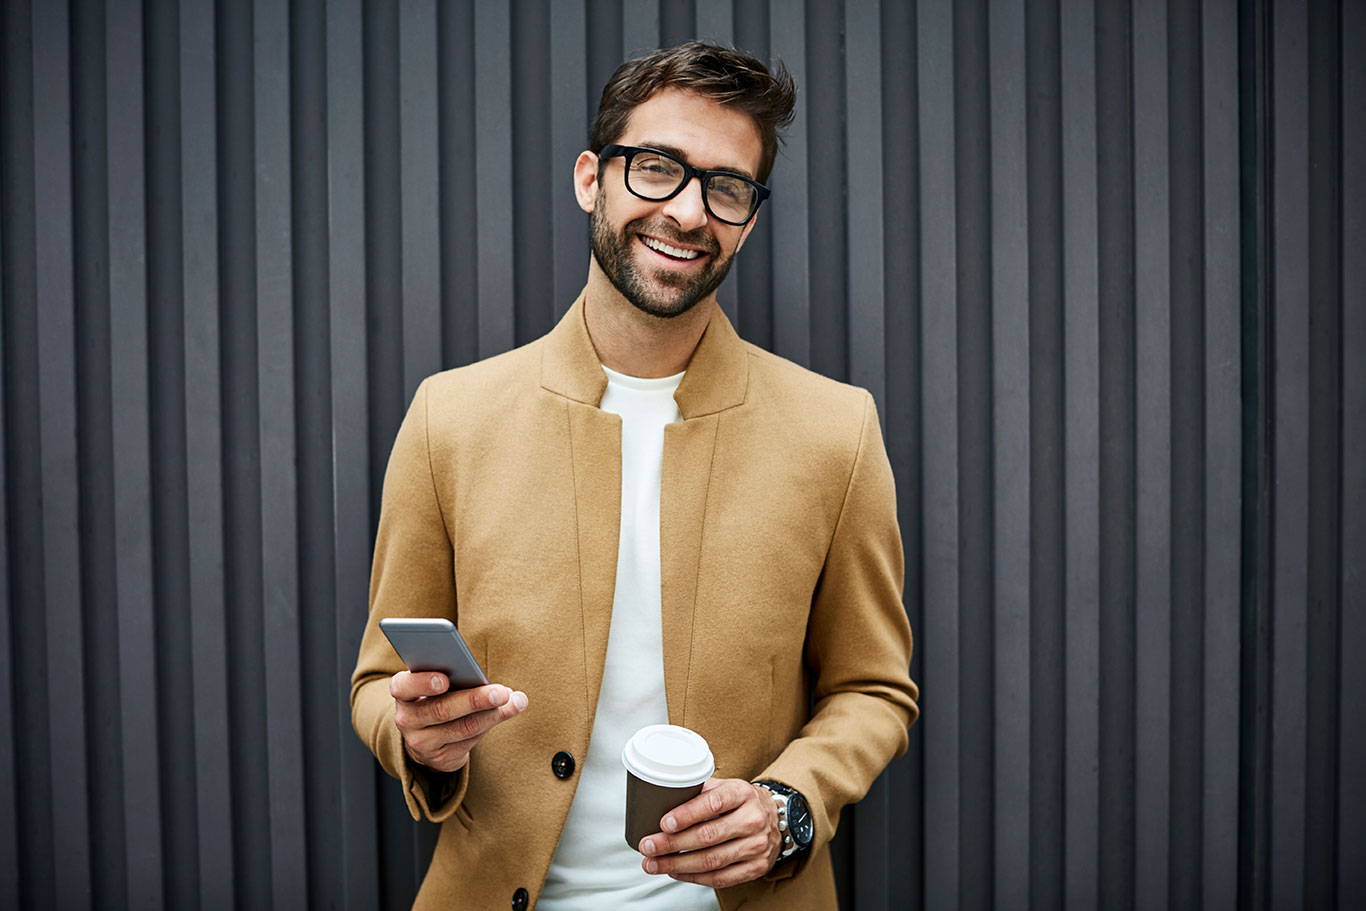 Man holding phone and a coffee